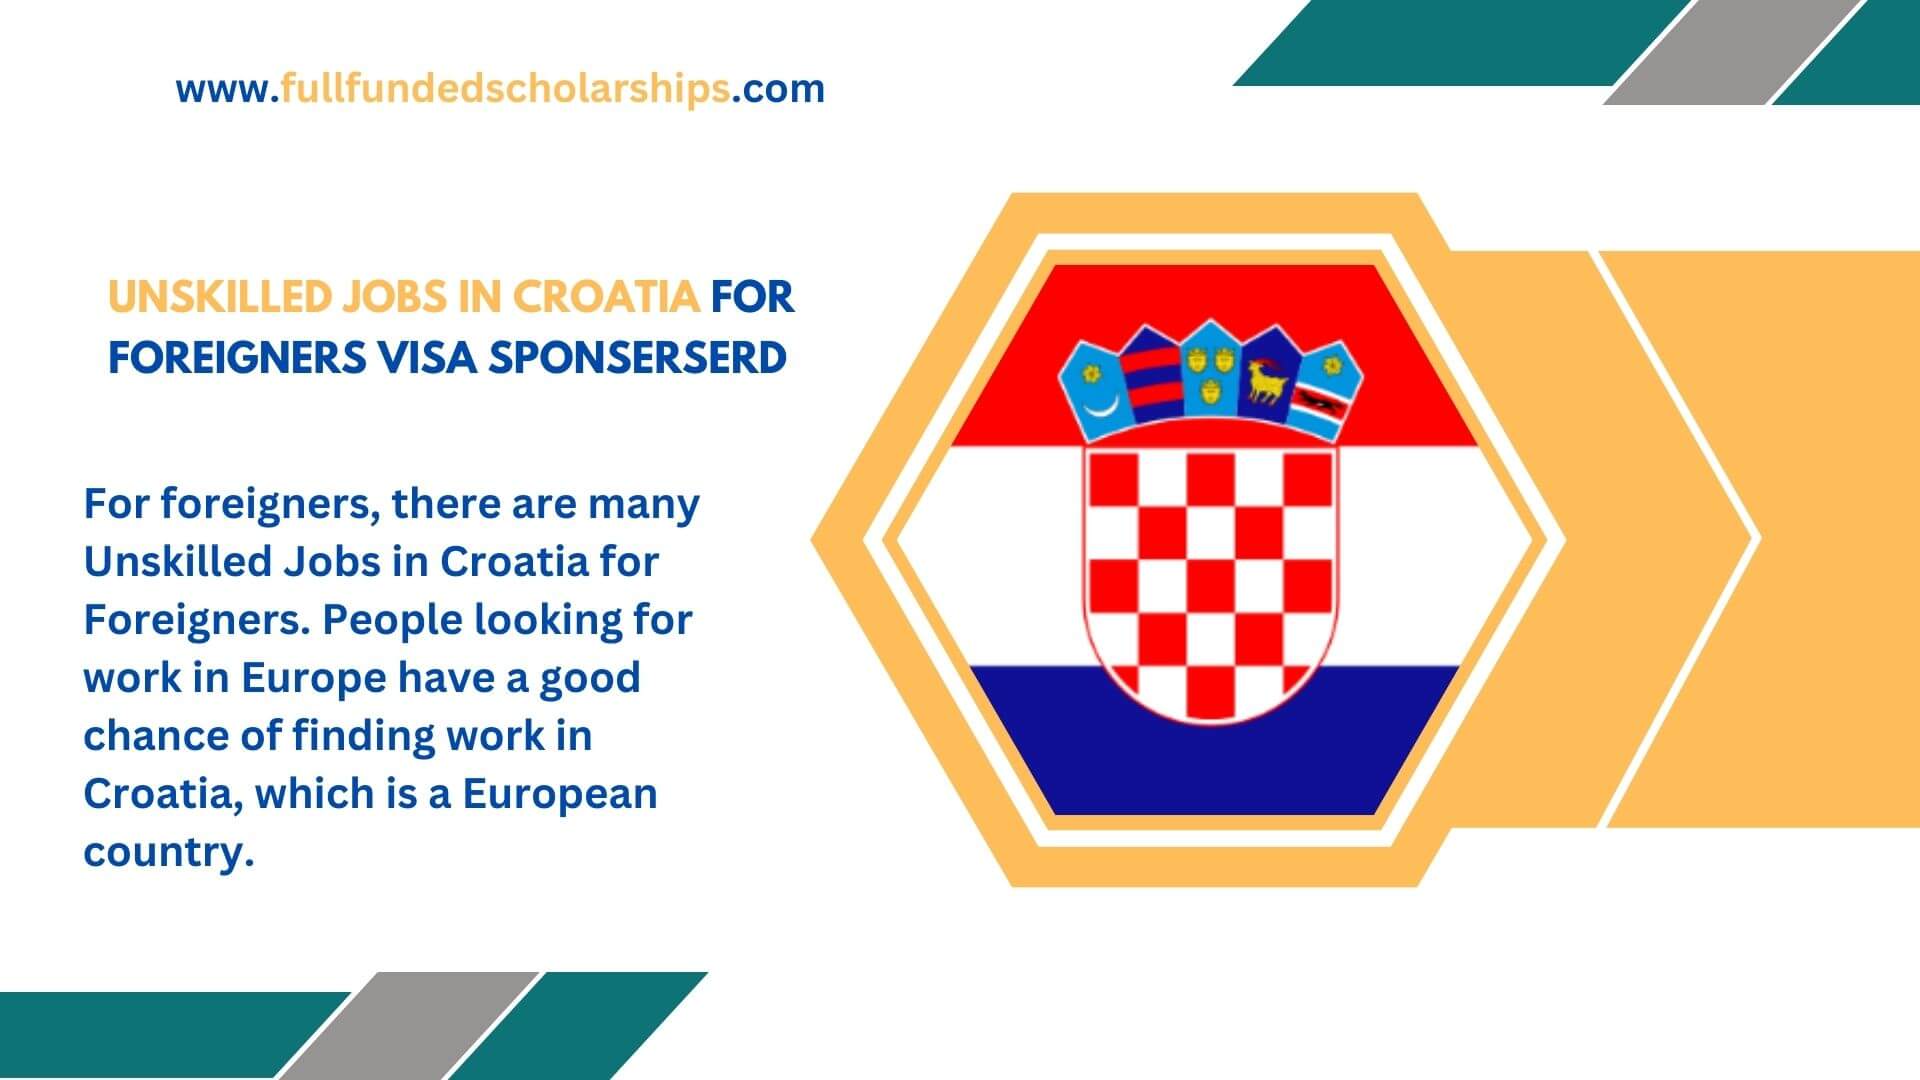 Unskilled Jobs in Croatia for Foreigners Visa Sponserserd